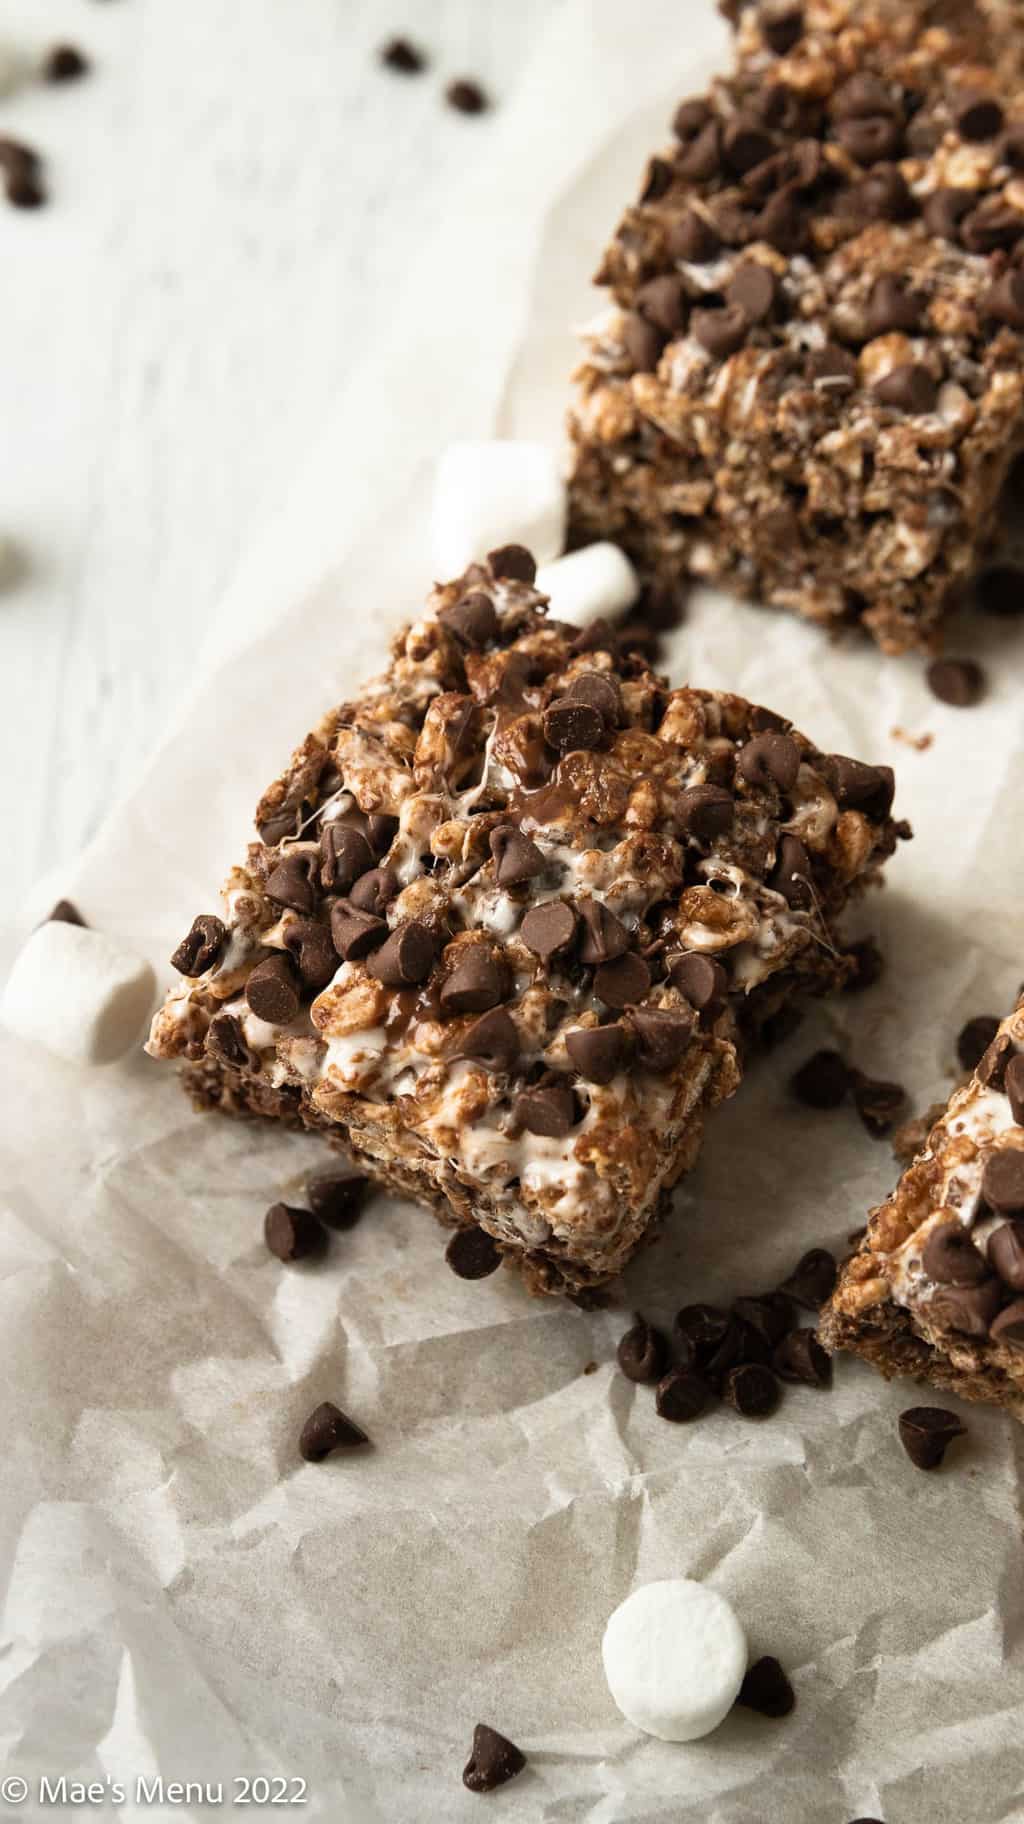 An up-close overhead shot of a chocolate rice crispy treat on parchment paper.